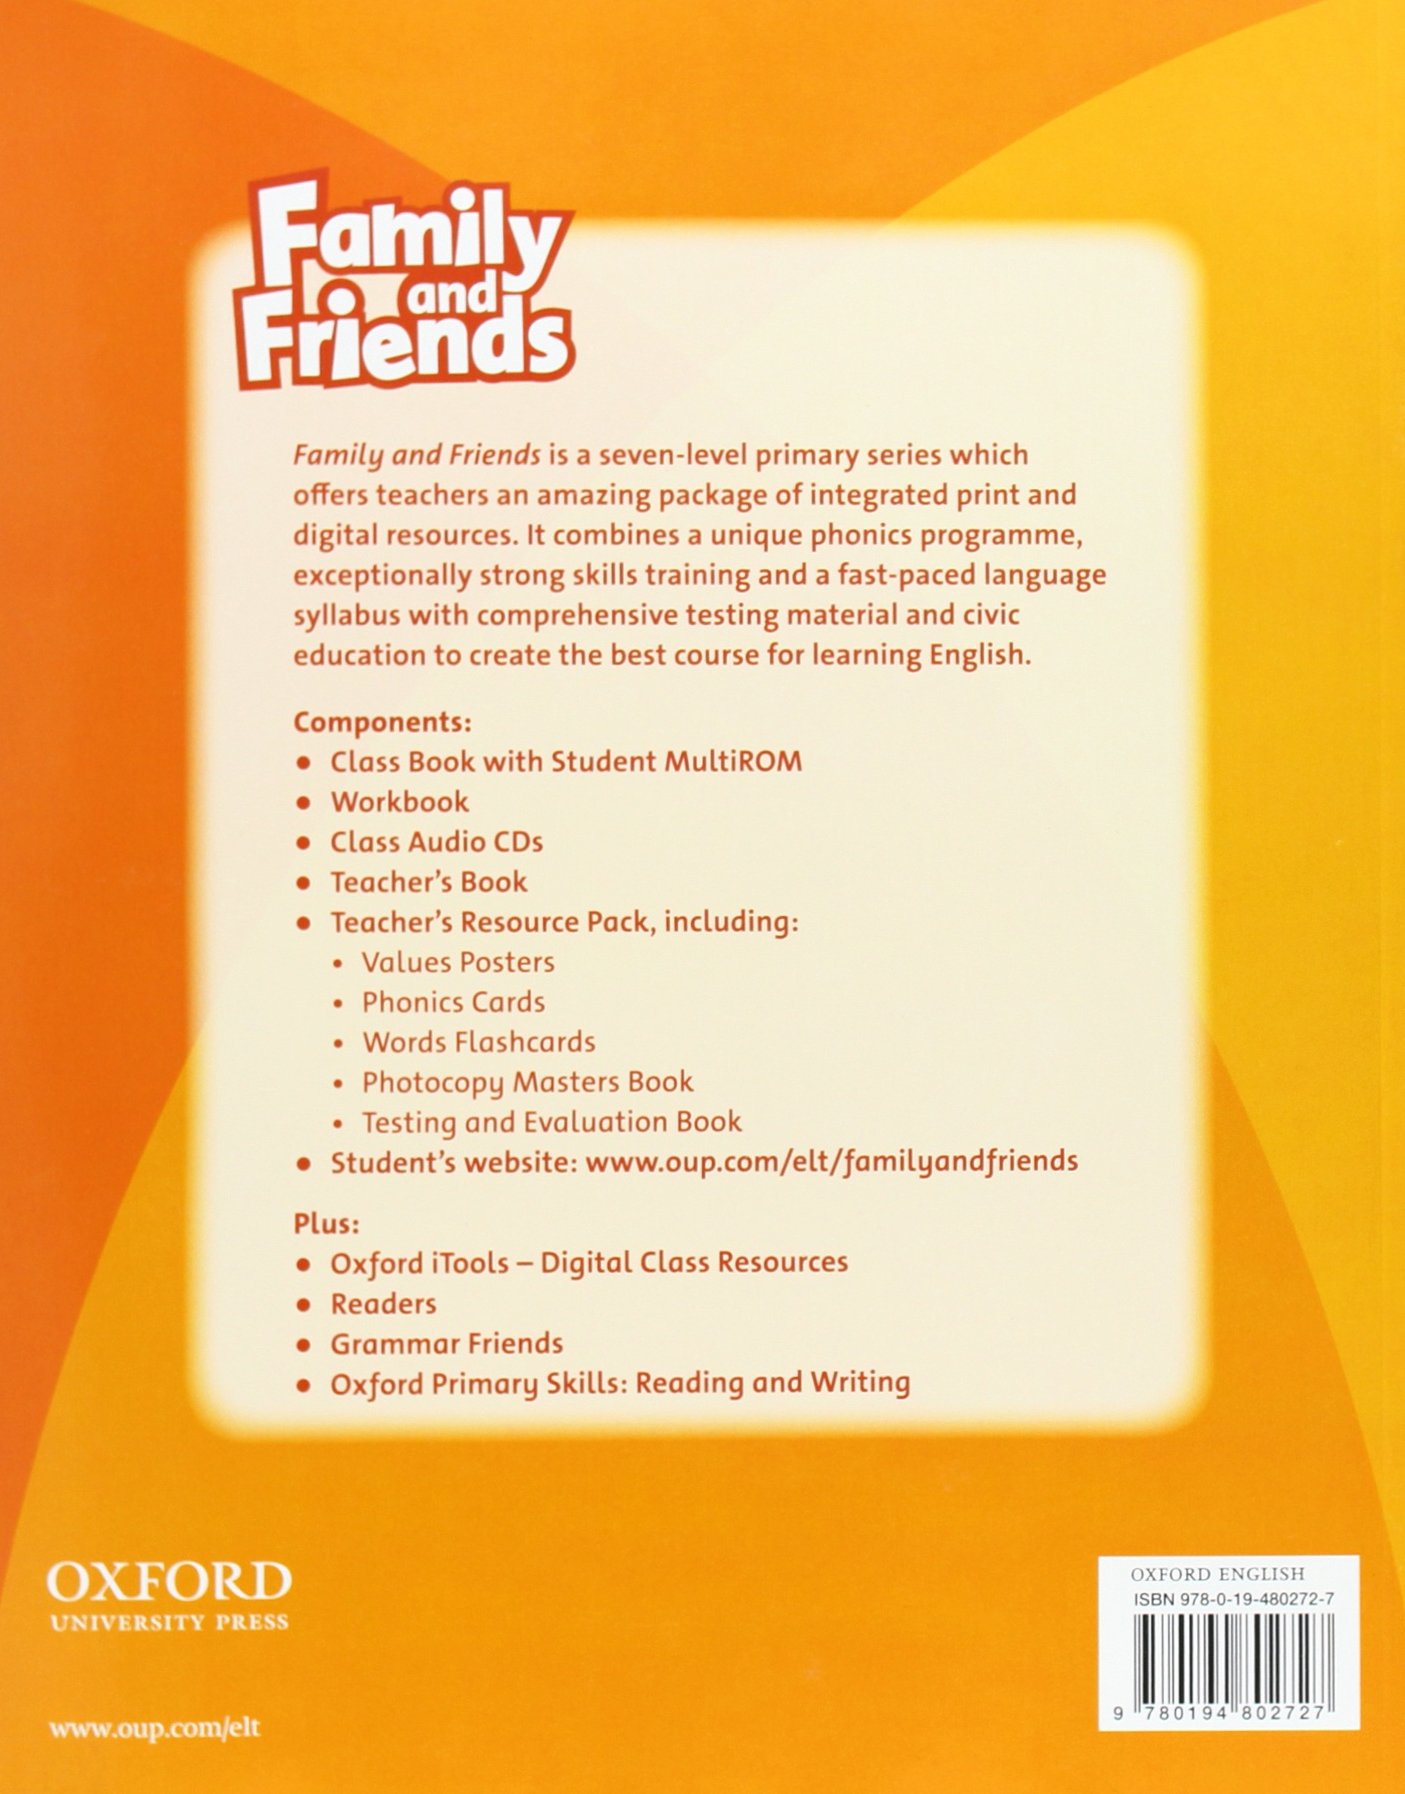 Family and Friends 4 Workbook (British English Edition)